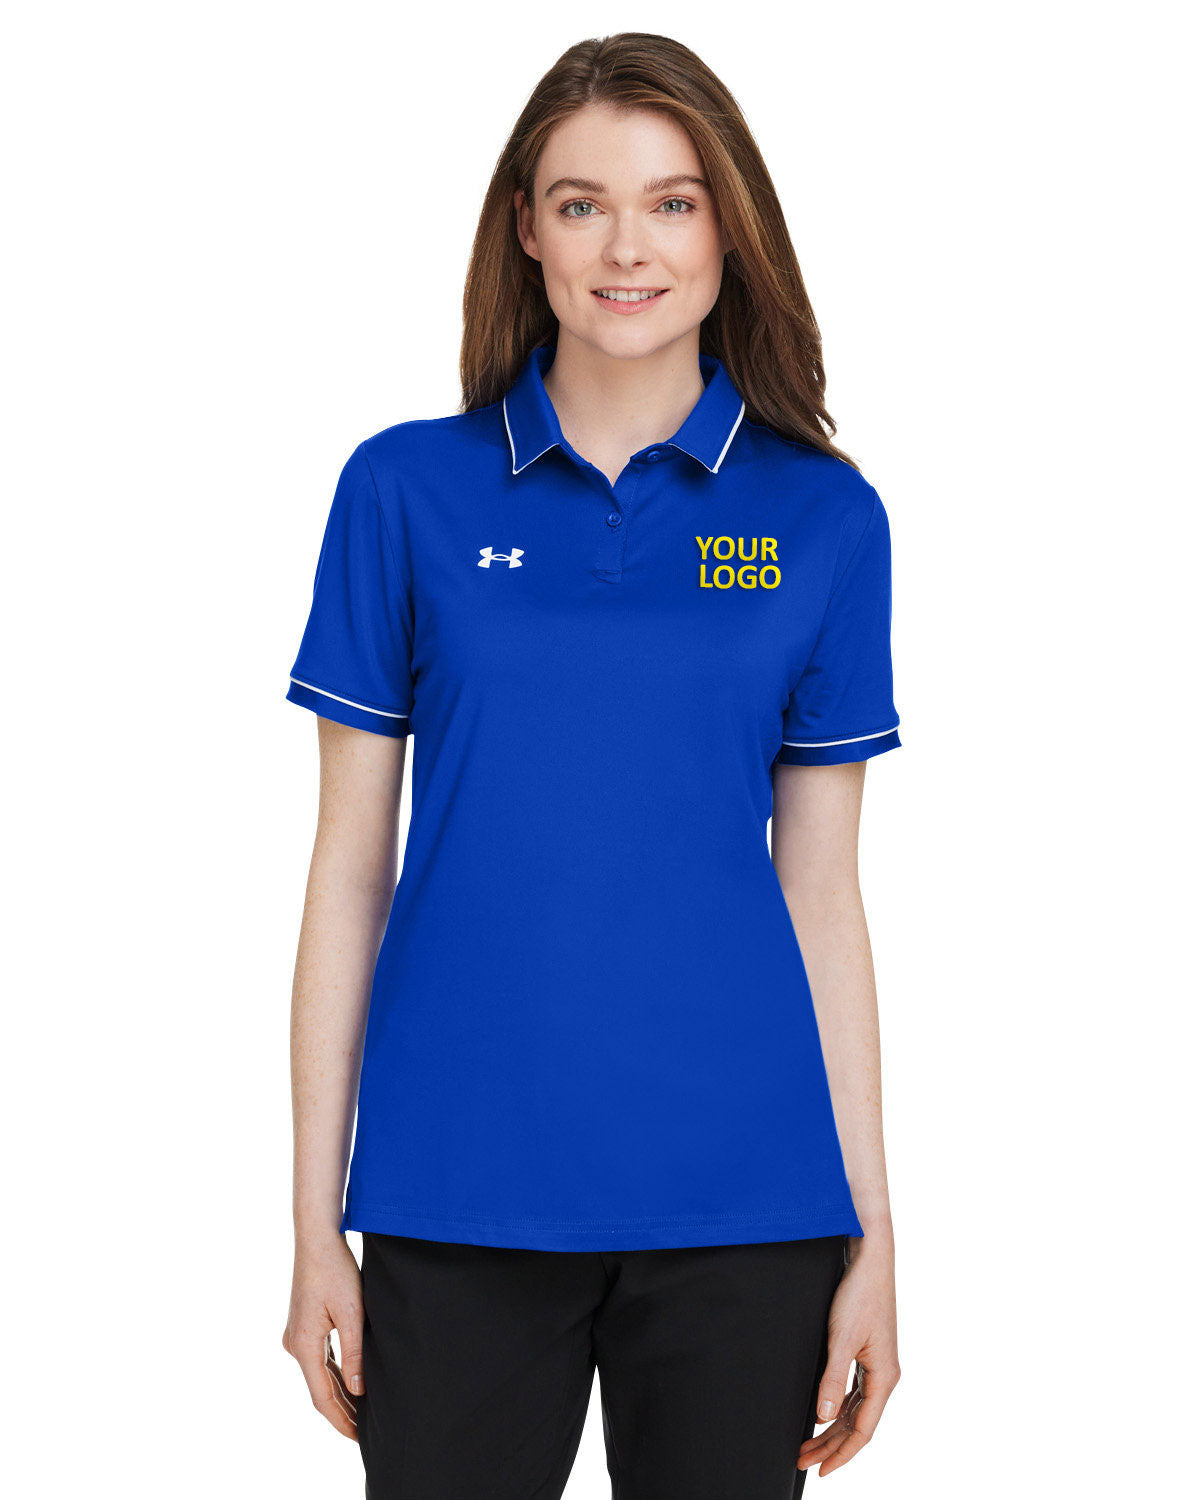 Under Armour Ladies Tipped Teams Performance Branded Polos, Royal